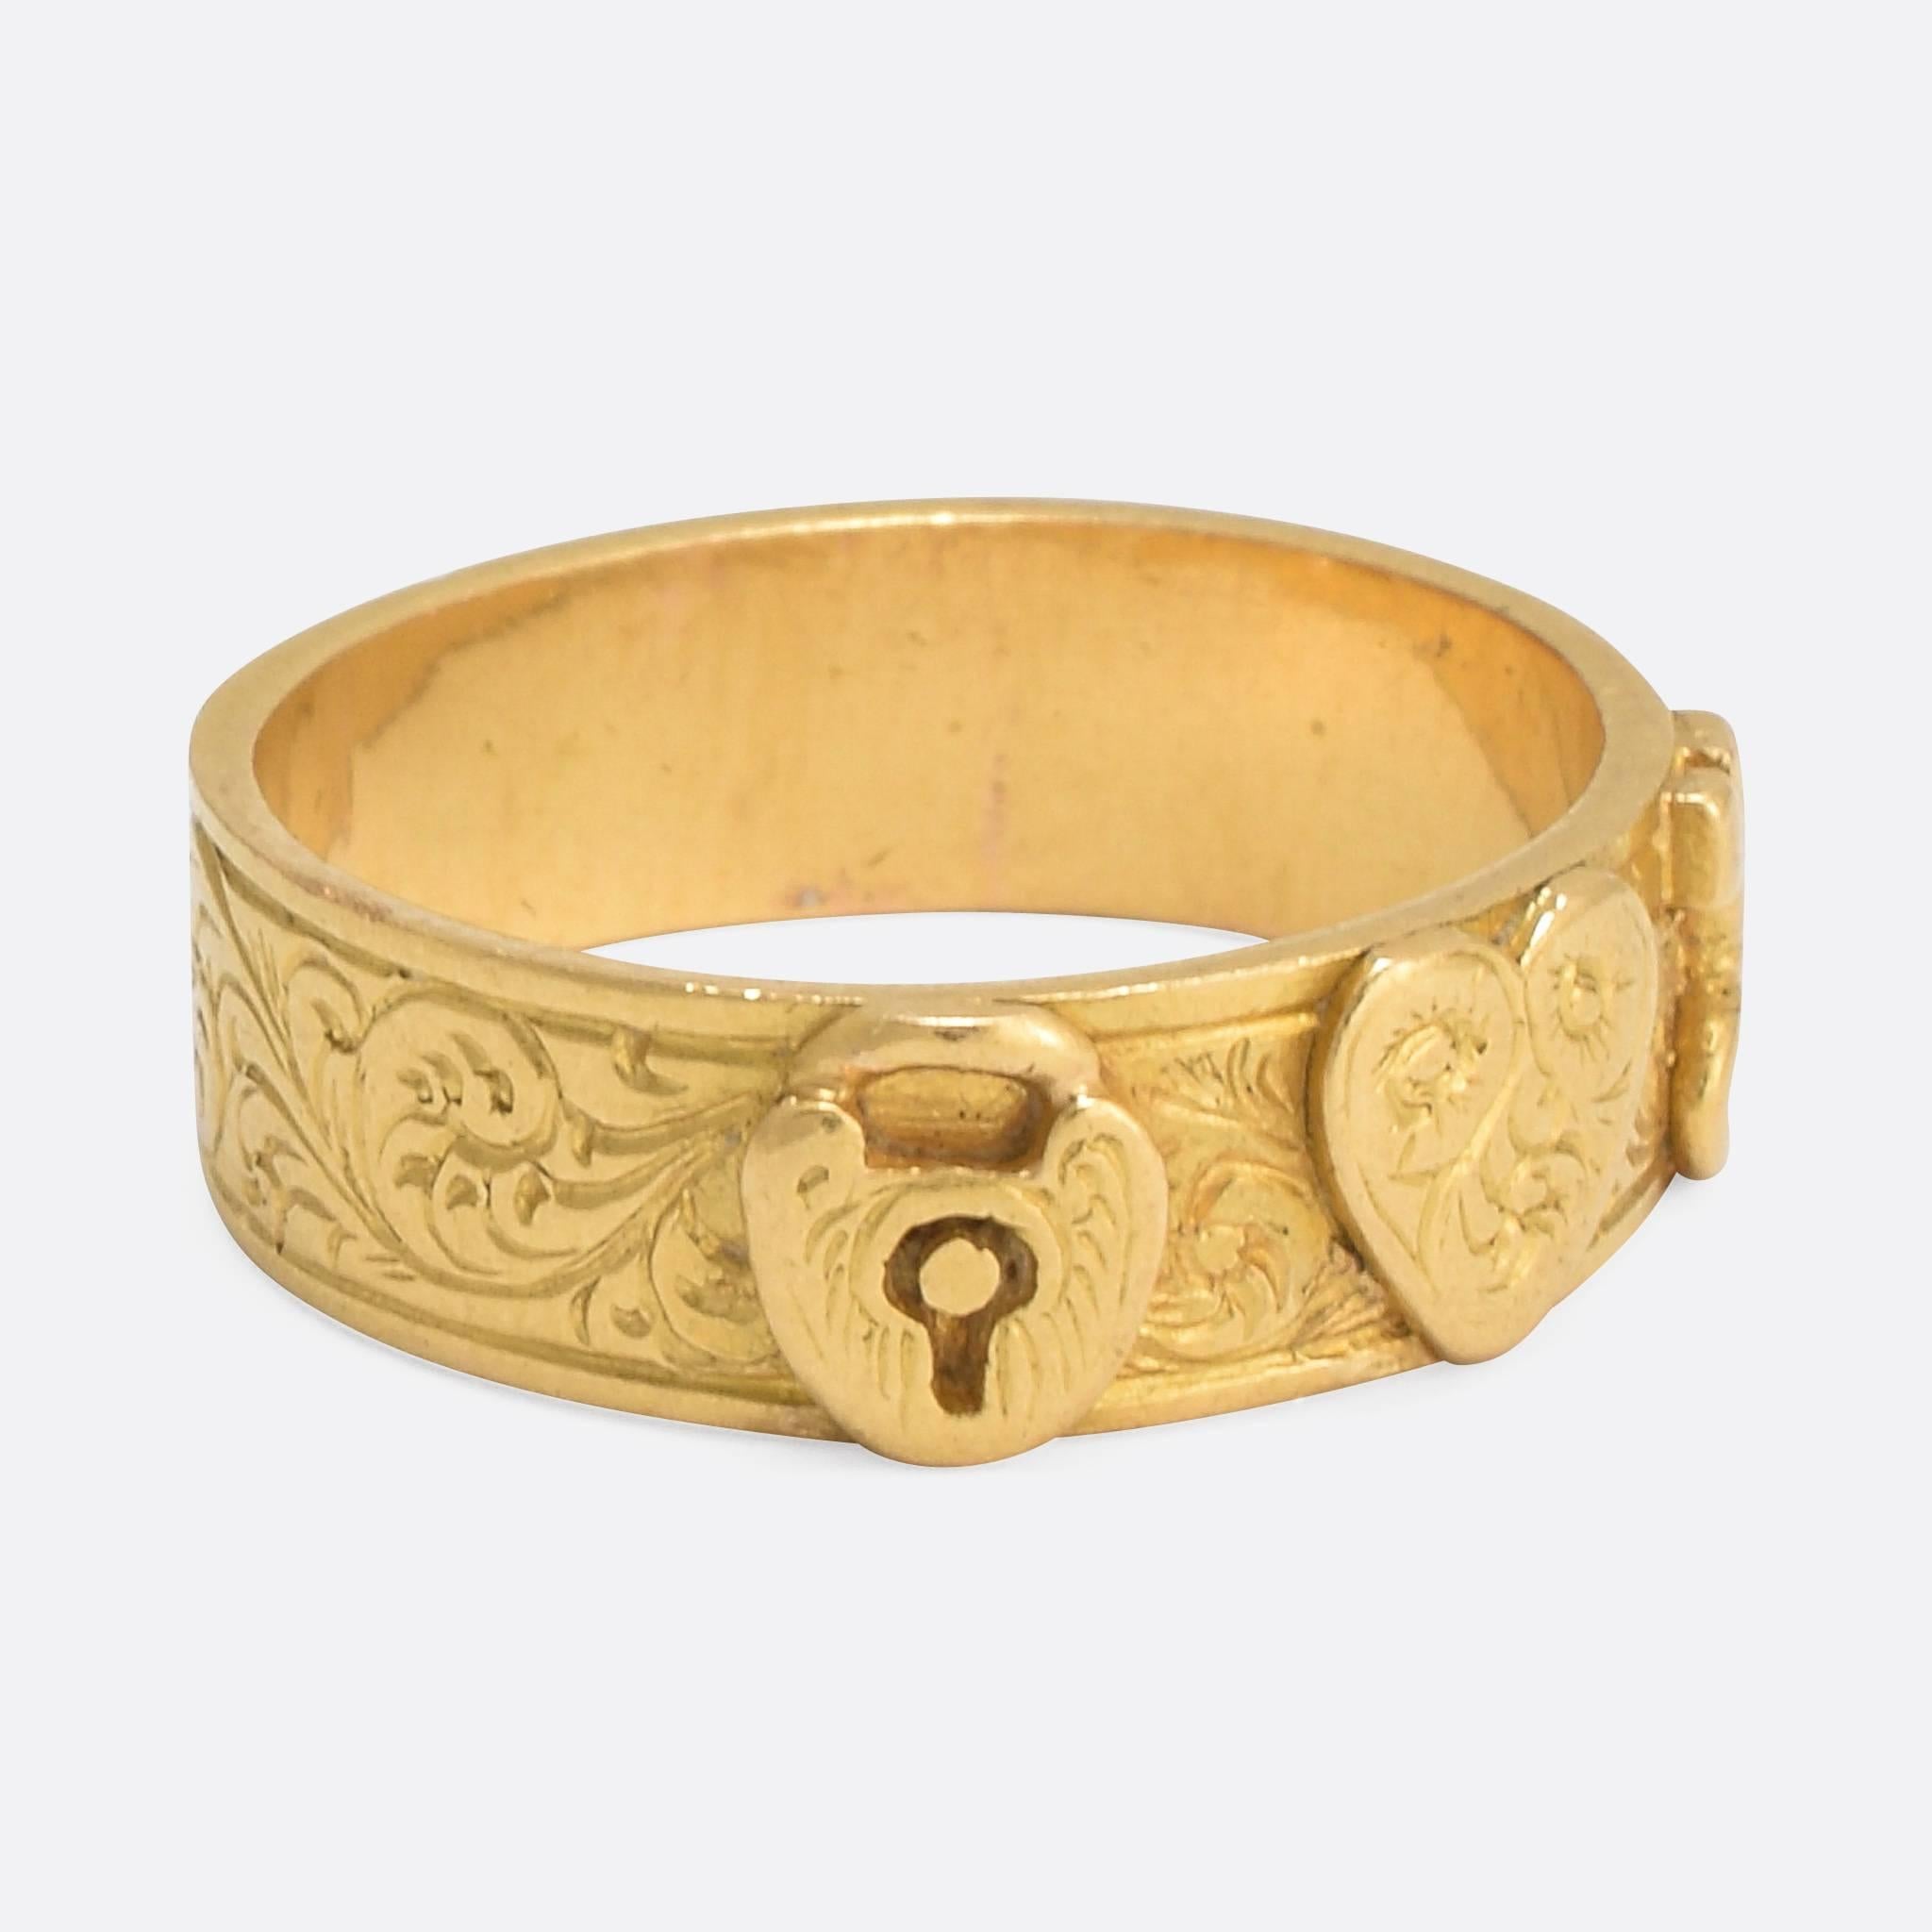 An exceptionally good quality mid/late 19th century 18k Gold wedding band, the front with applied lock and key with a central love heart, symbolising the giver owns the key to the receivers heart. Ring size: 4.75.